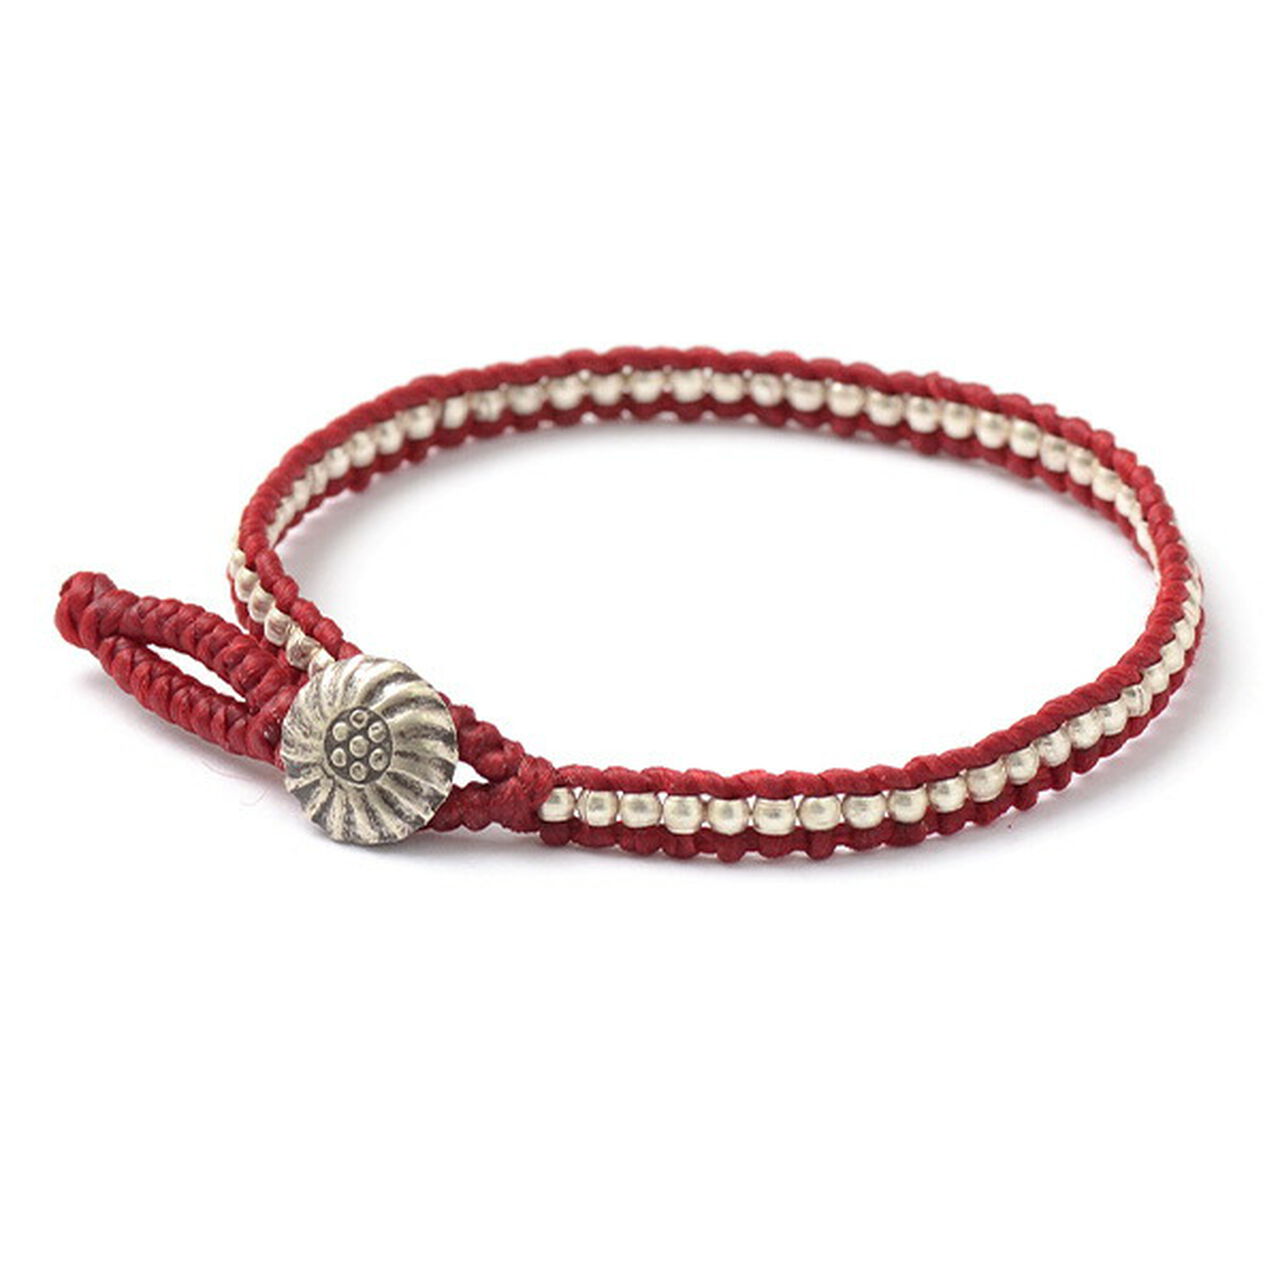 Waxed cord silver single strand concho bracelet,Red, large image number 0